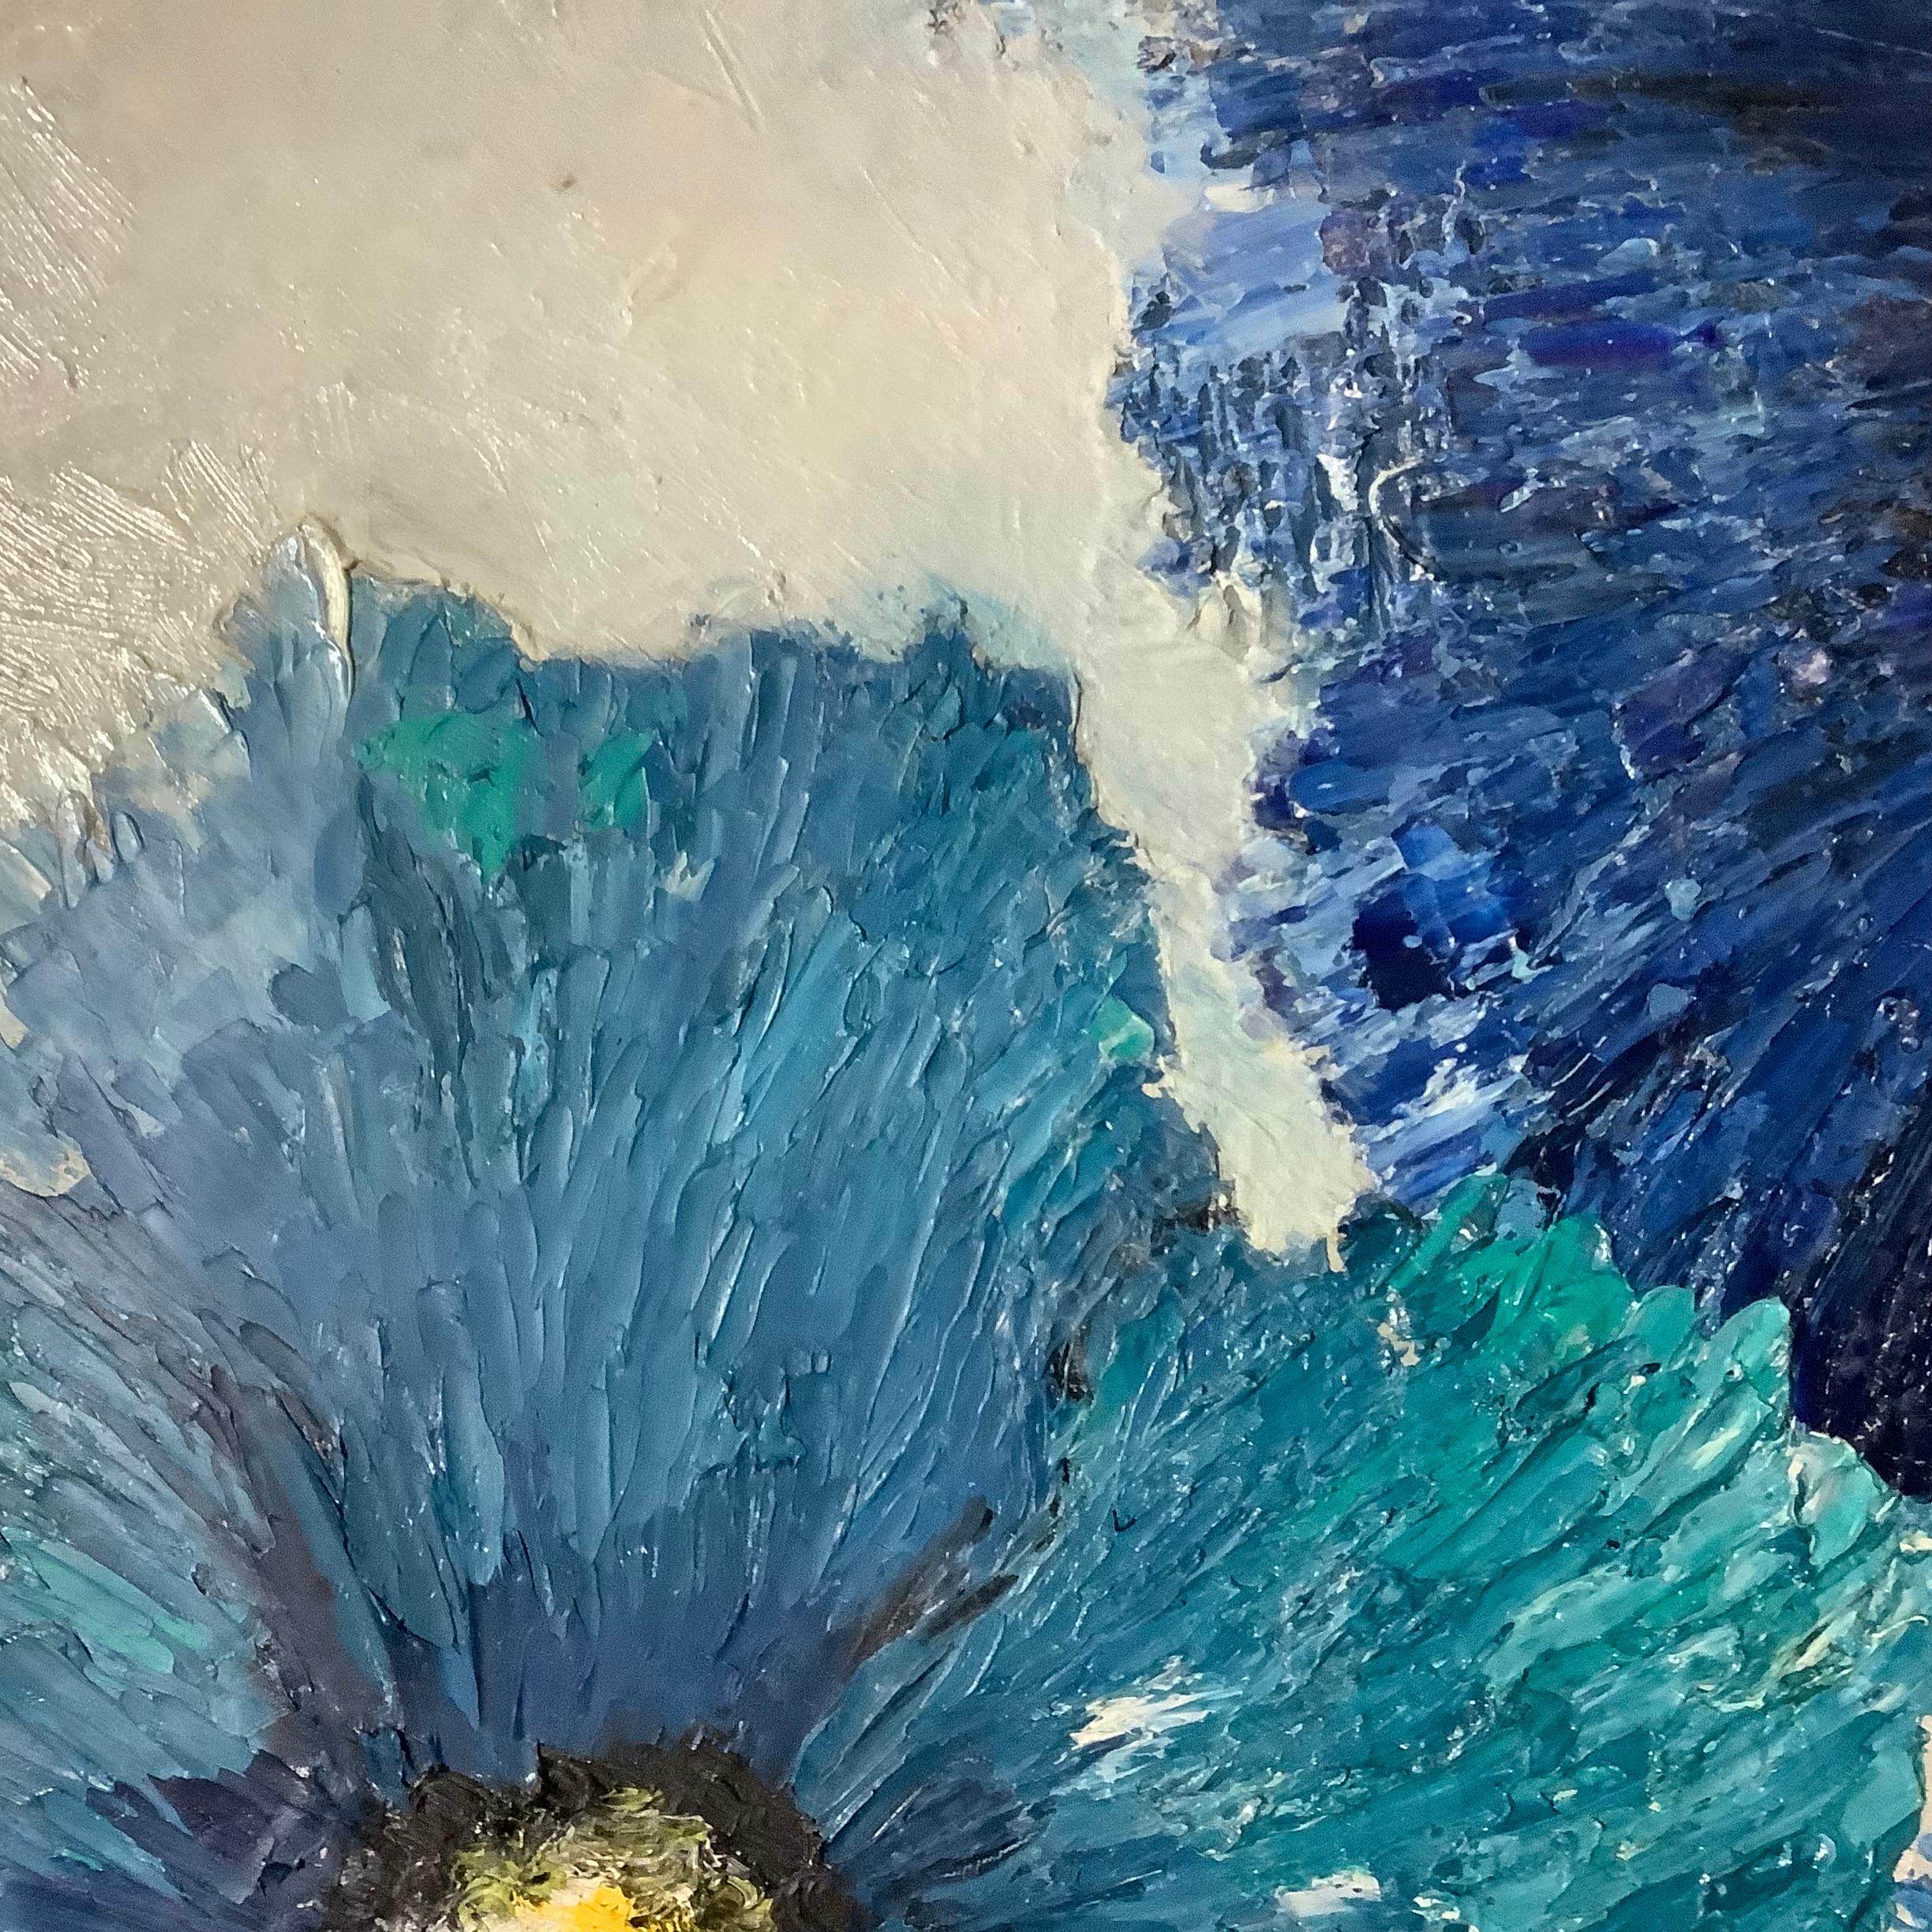 I love to paint the blue poppies as they are truly blue with delicate and fragile petals. The journey of the blue poppy is that of triumph and optimism, that will inspire the viewer to appreciate the uniqueness and ethereal beauty of this special